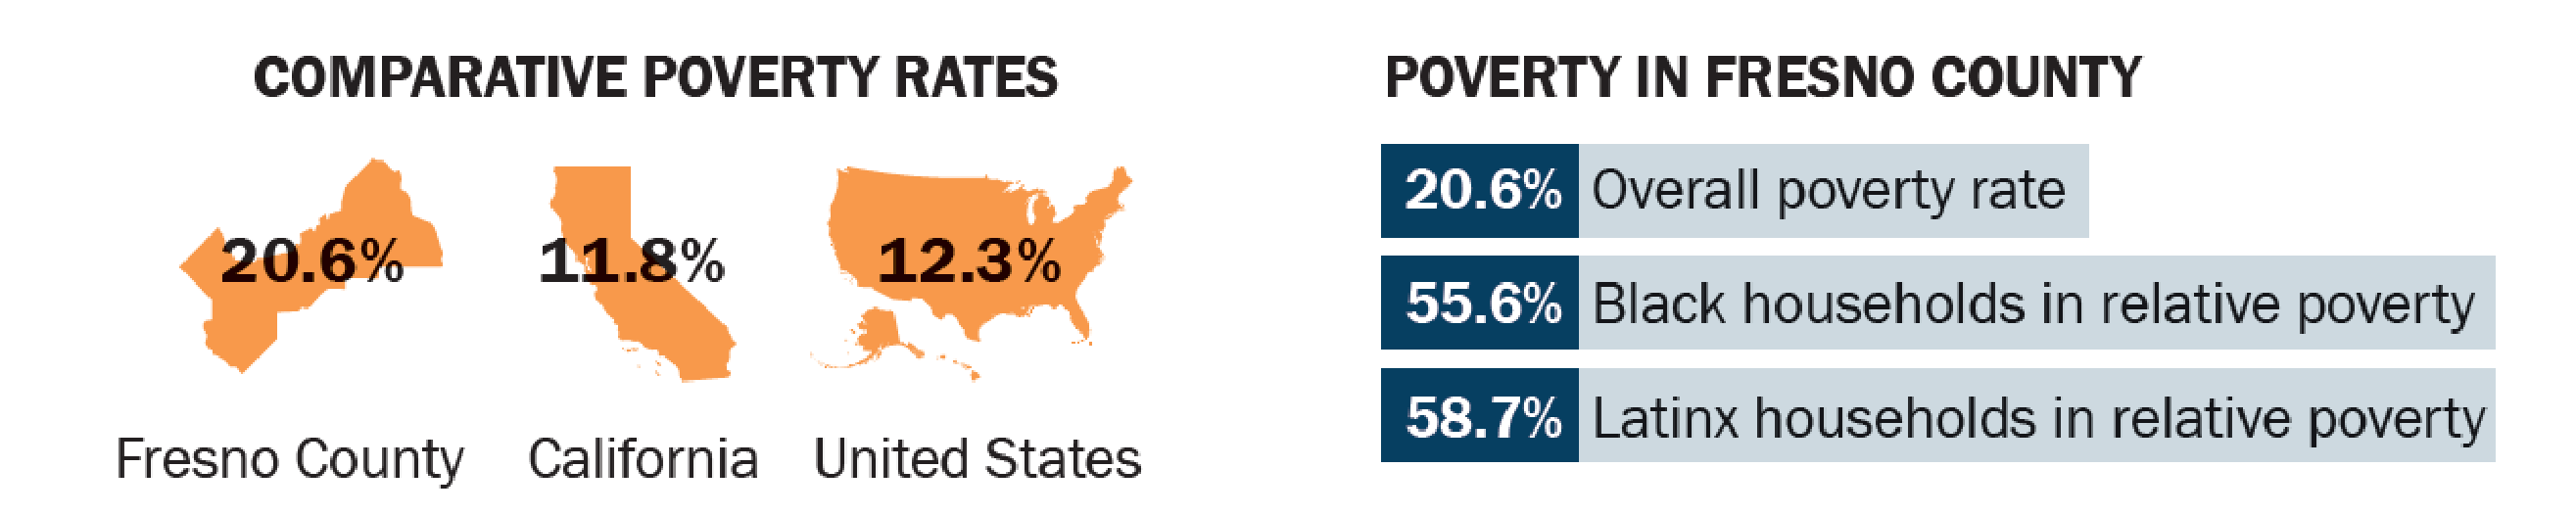 image depicting Comparative Poverty Rates 11.8% state, 20.6% county, 12.3% national. Also mentions poverty by race: overall poverty rate of 20.6%, Black households at 55.6%, and Latinx households at 58.7%